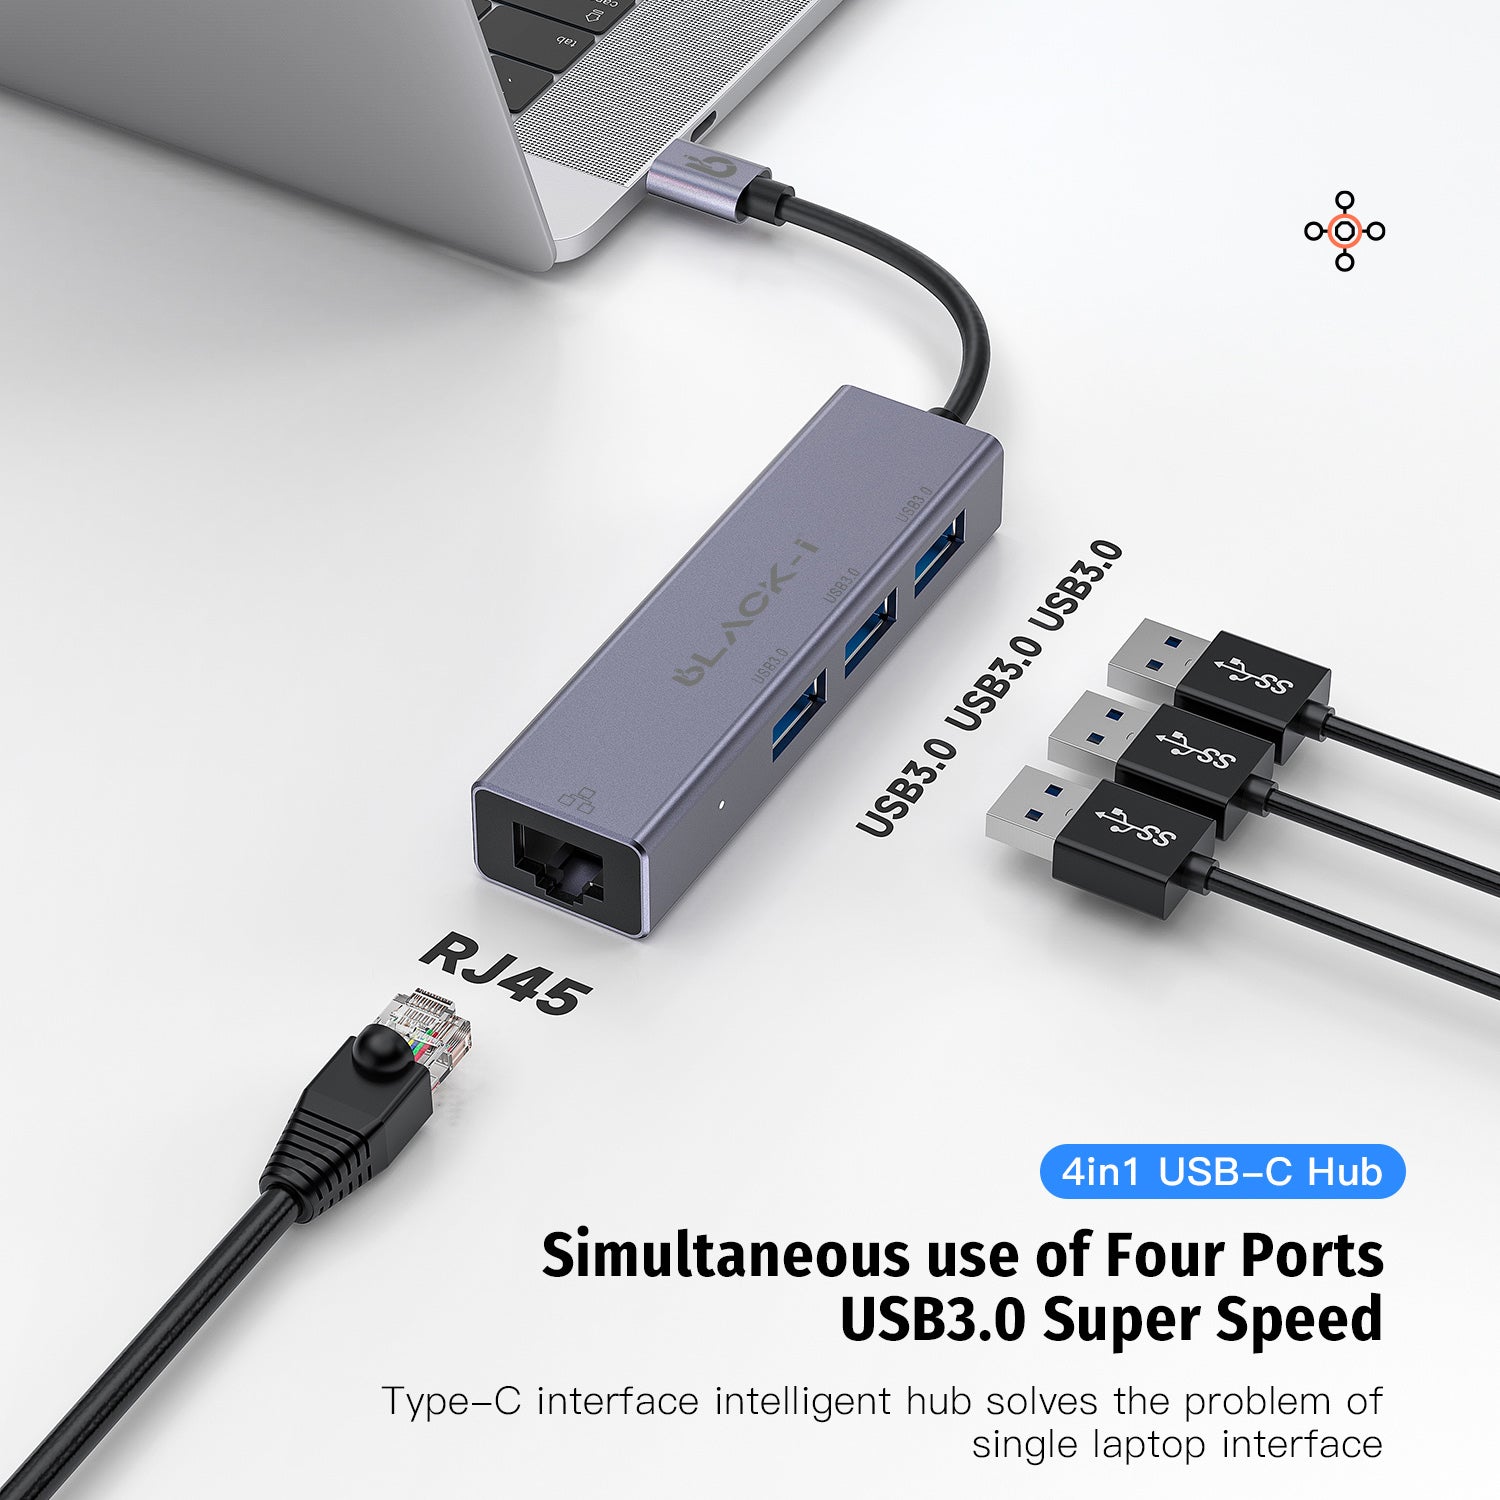 Black-i USB-C to 3-Port USB 3.0 Hub & Gigabit LAN – Expand Connectivity with High-Speed Data Transfer and Reliable Network Access